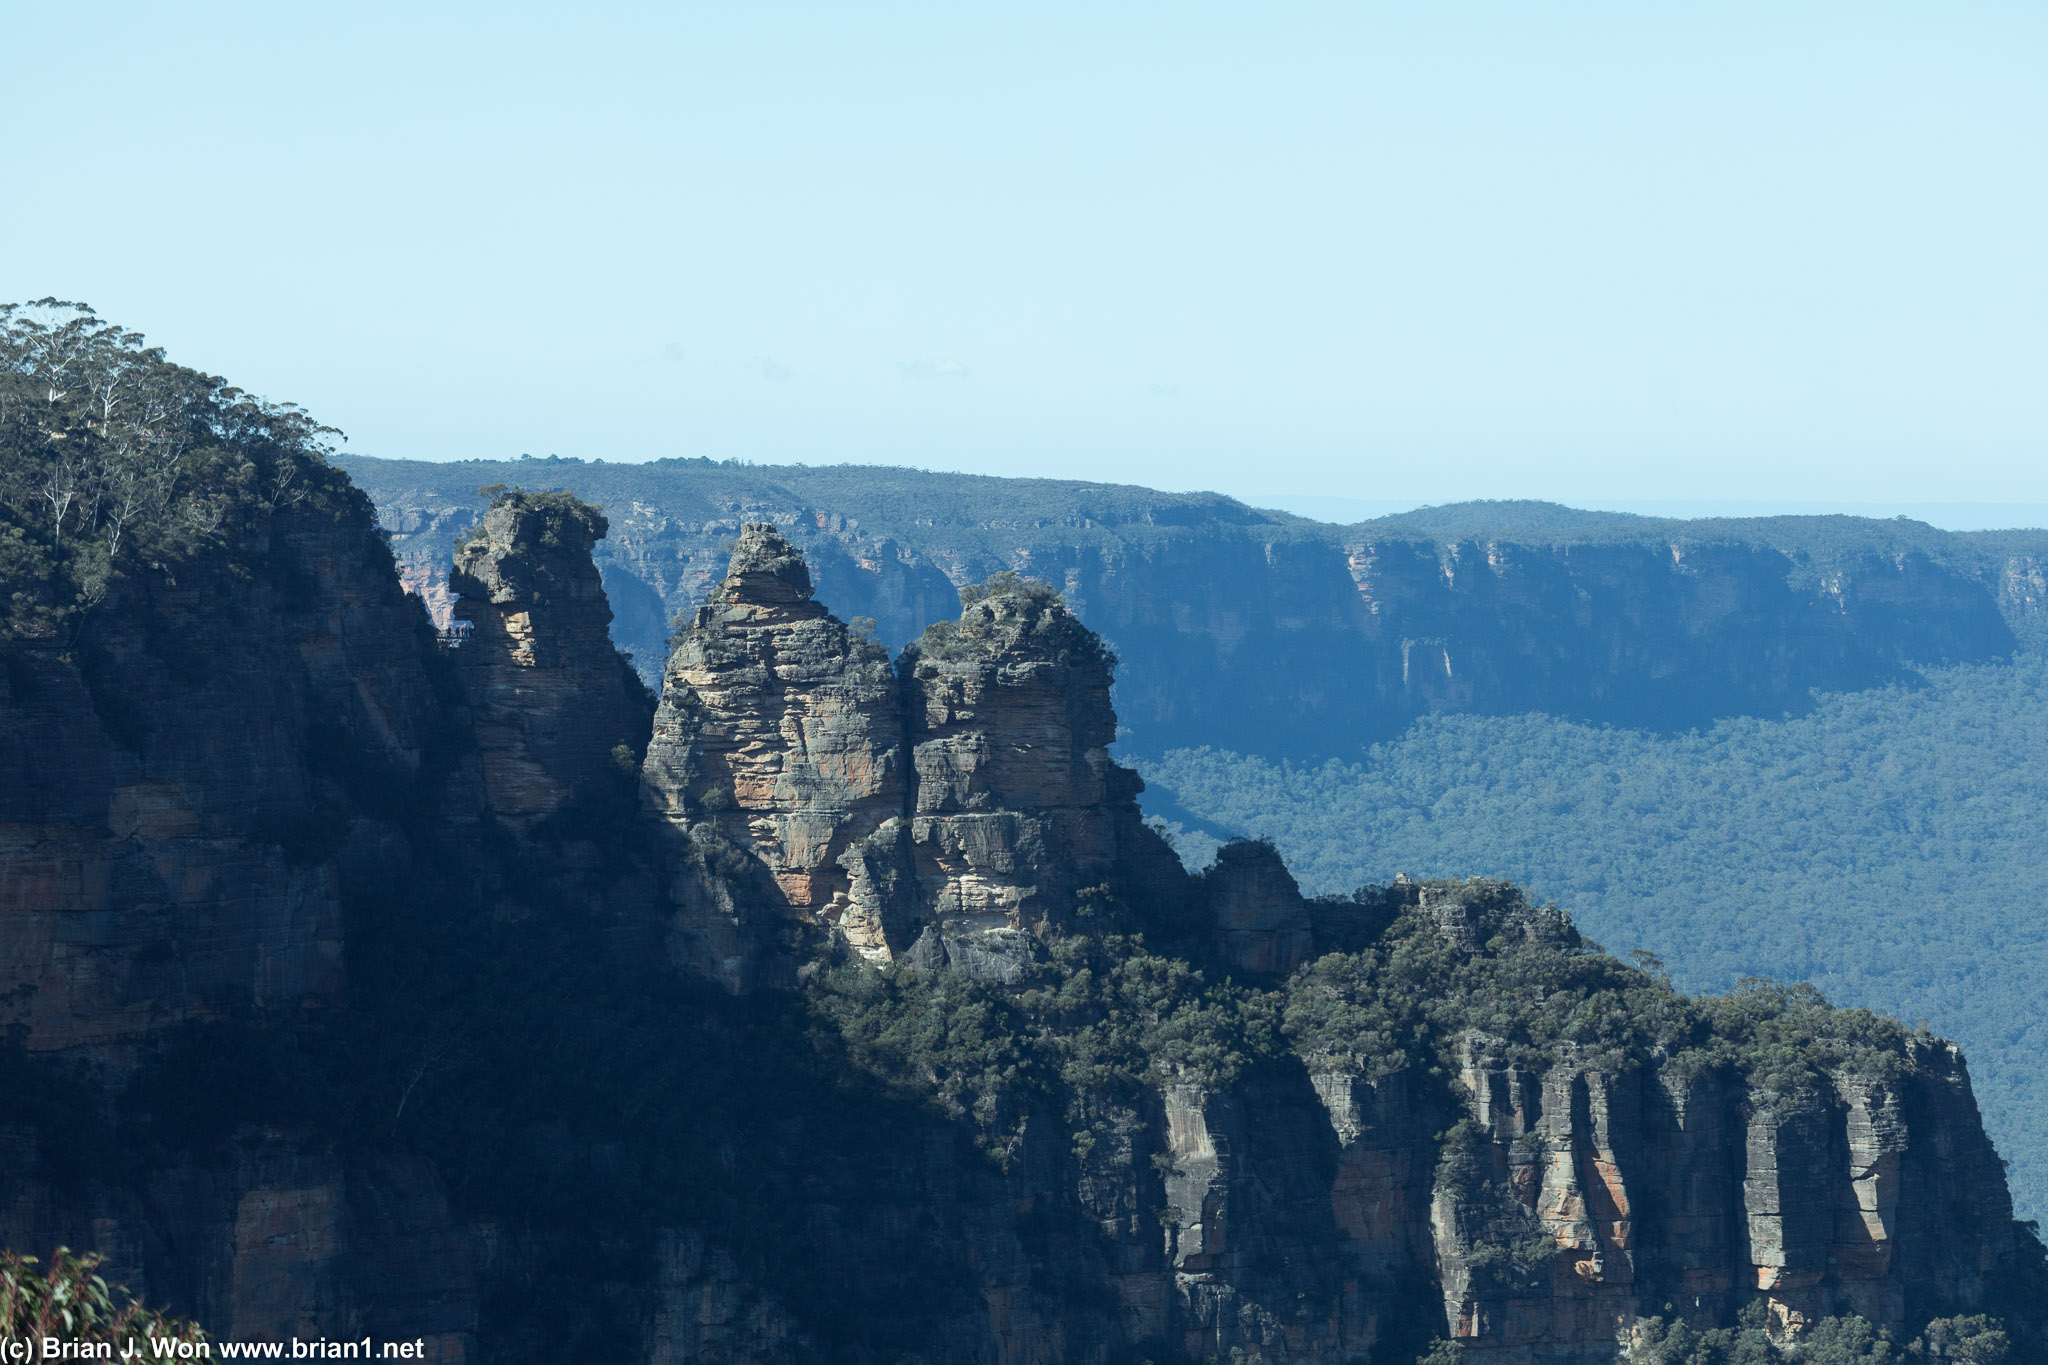 Three Sisters as seen from the Skyway tram.